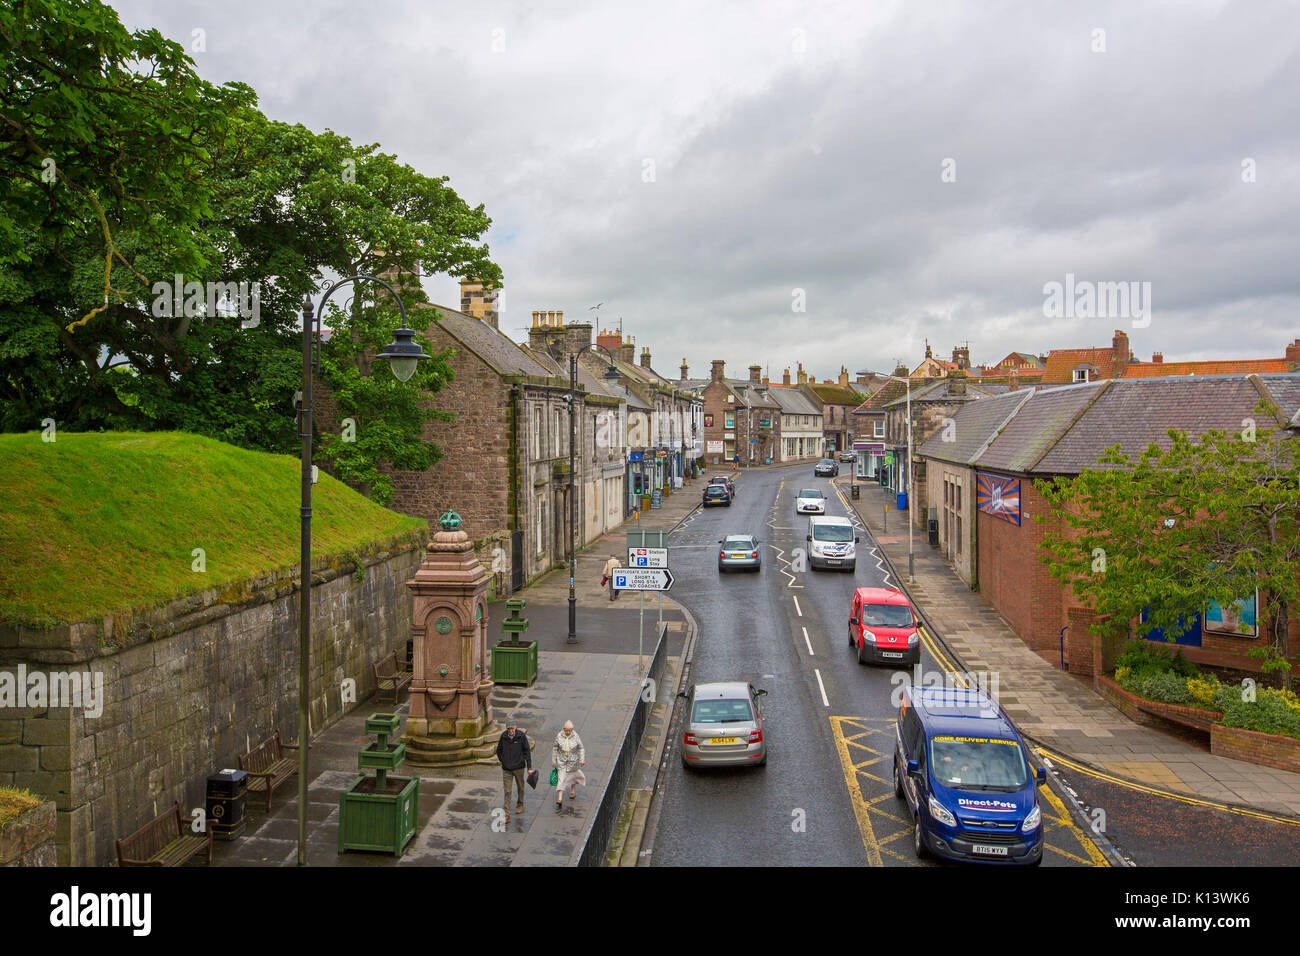 Main street of Berwick-upon-Tweed slicing through town of historic buildings, with vehicles and pedestrians passing old Roman wall, in England Stock Photo